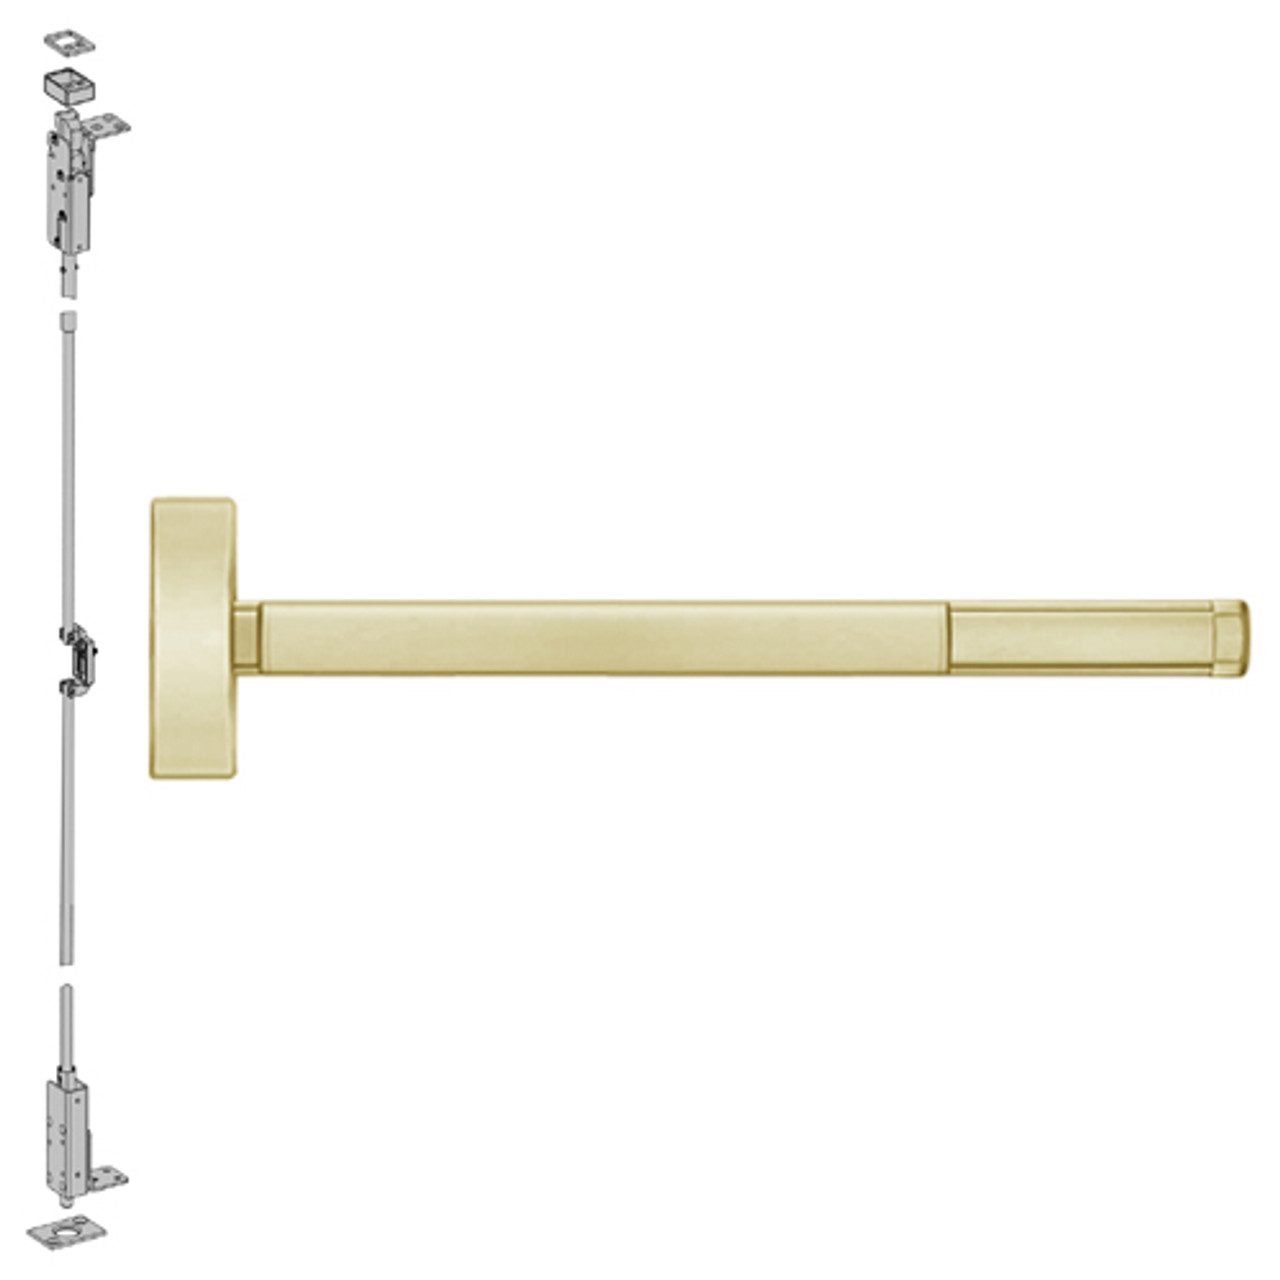 TS2701LBR-606-48 PHI 2700 Series Wood Door Concealed Vertical Exit Device with Touchbar Monitoring Switch Prepped for Cover Plate in Satin Brass Finish